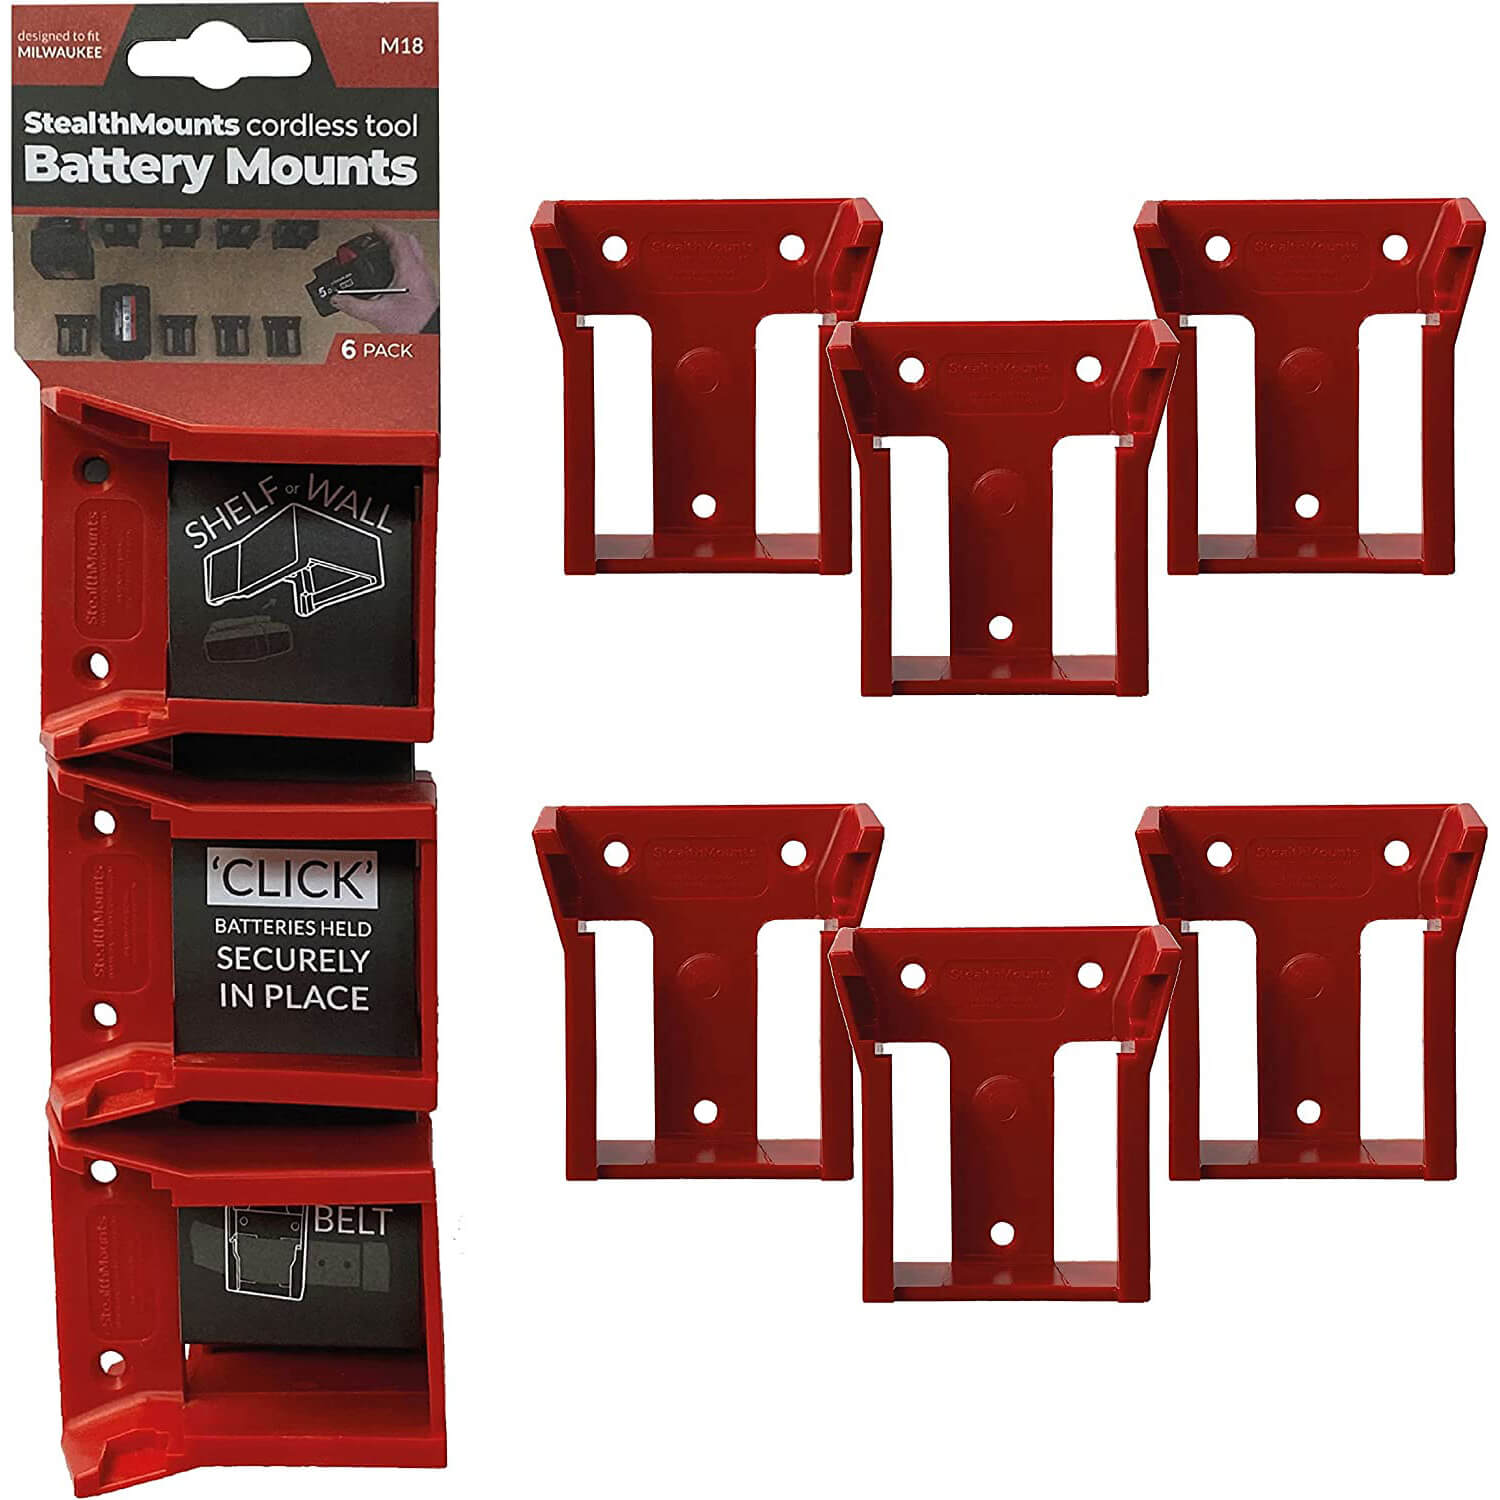 Stealth Mounts 6 Pack Battery Mounts for Milwaukee 18V M18 Batteries Red